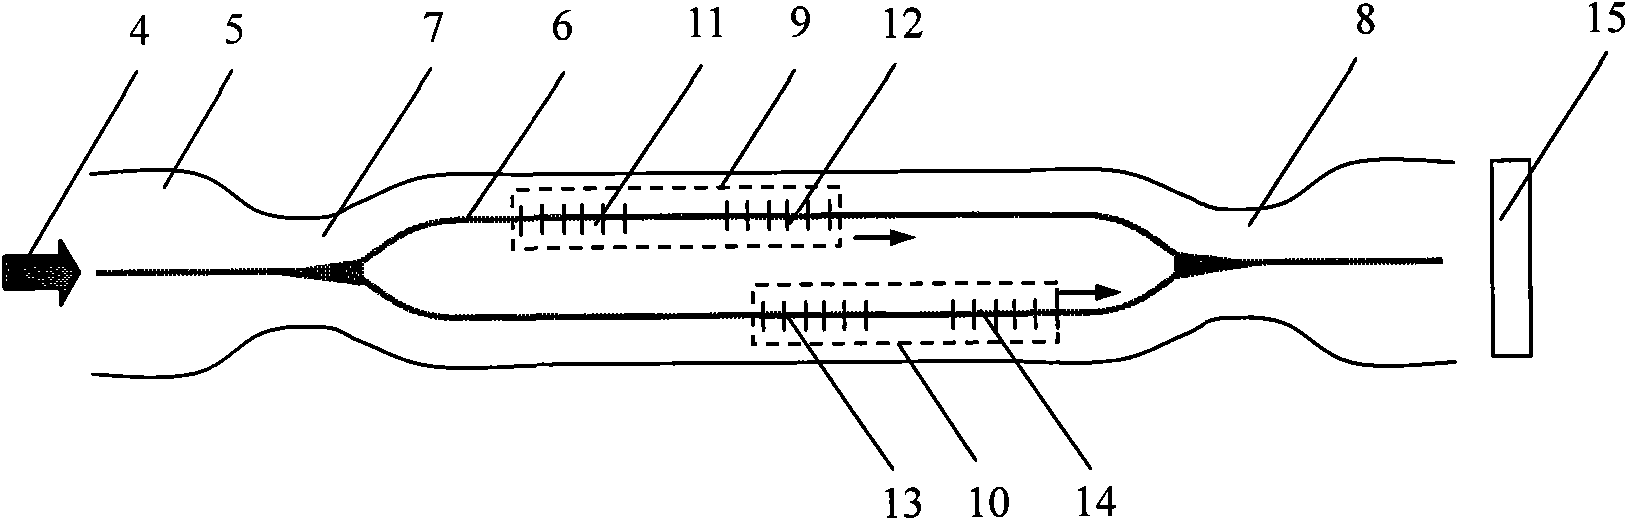 Interferometer combined by double F-P chambers and Mach-Zehnder